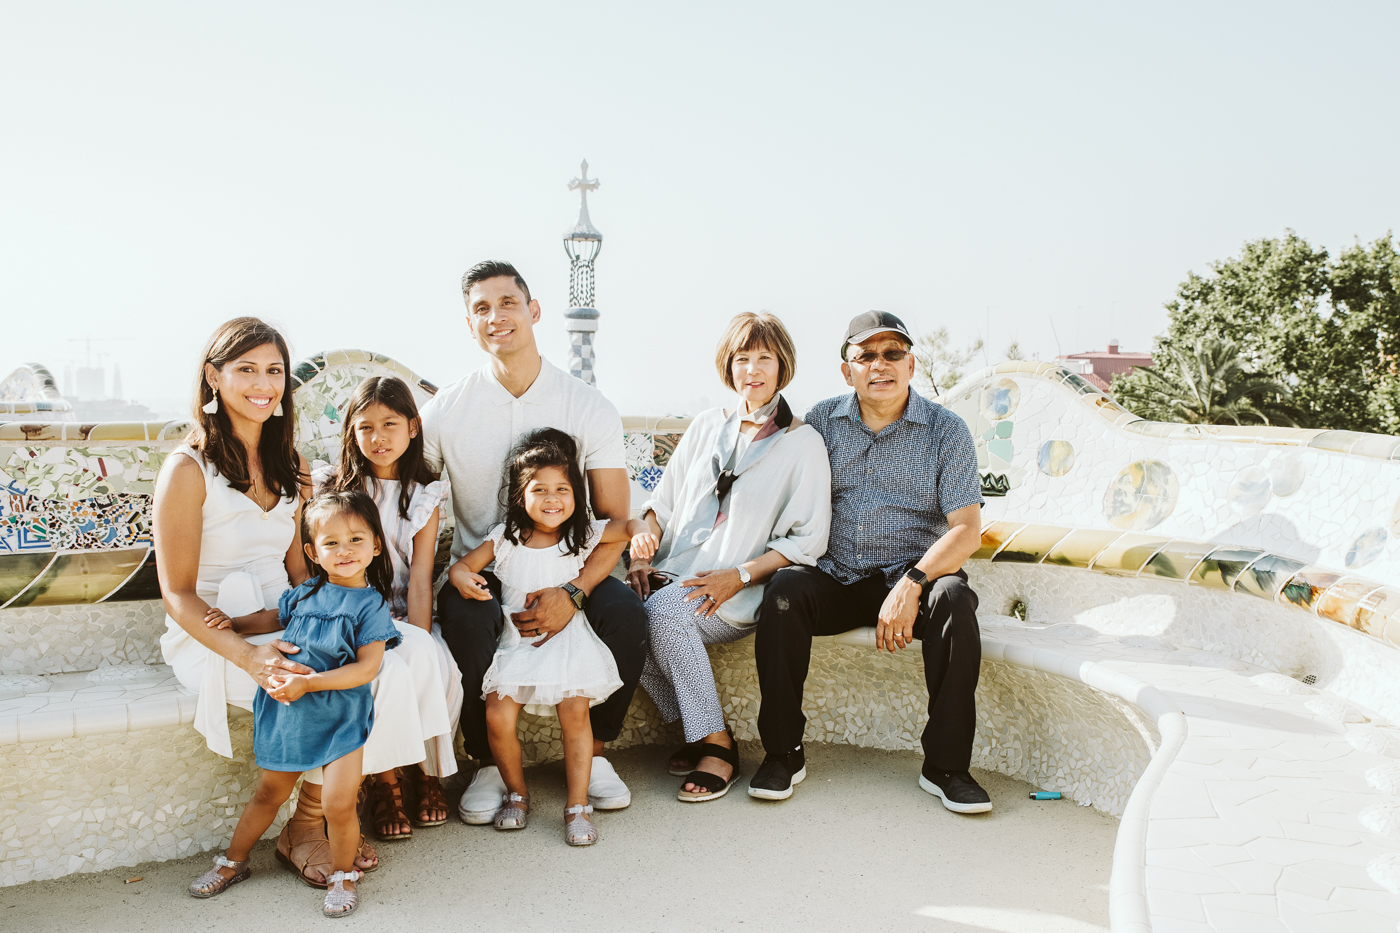 Family photo session in Park Guell, Barcelona